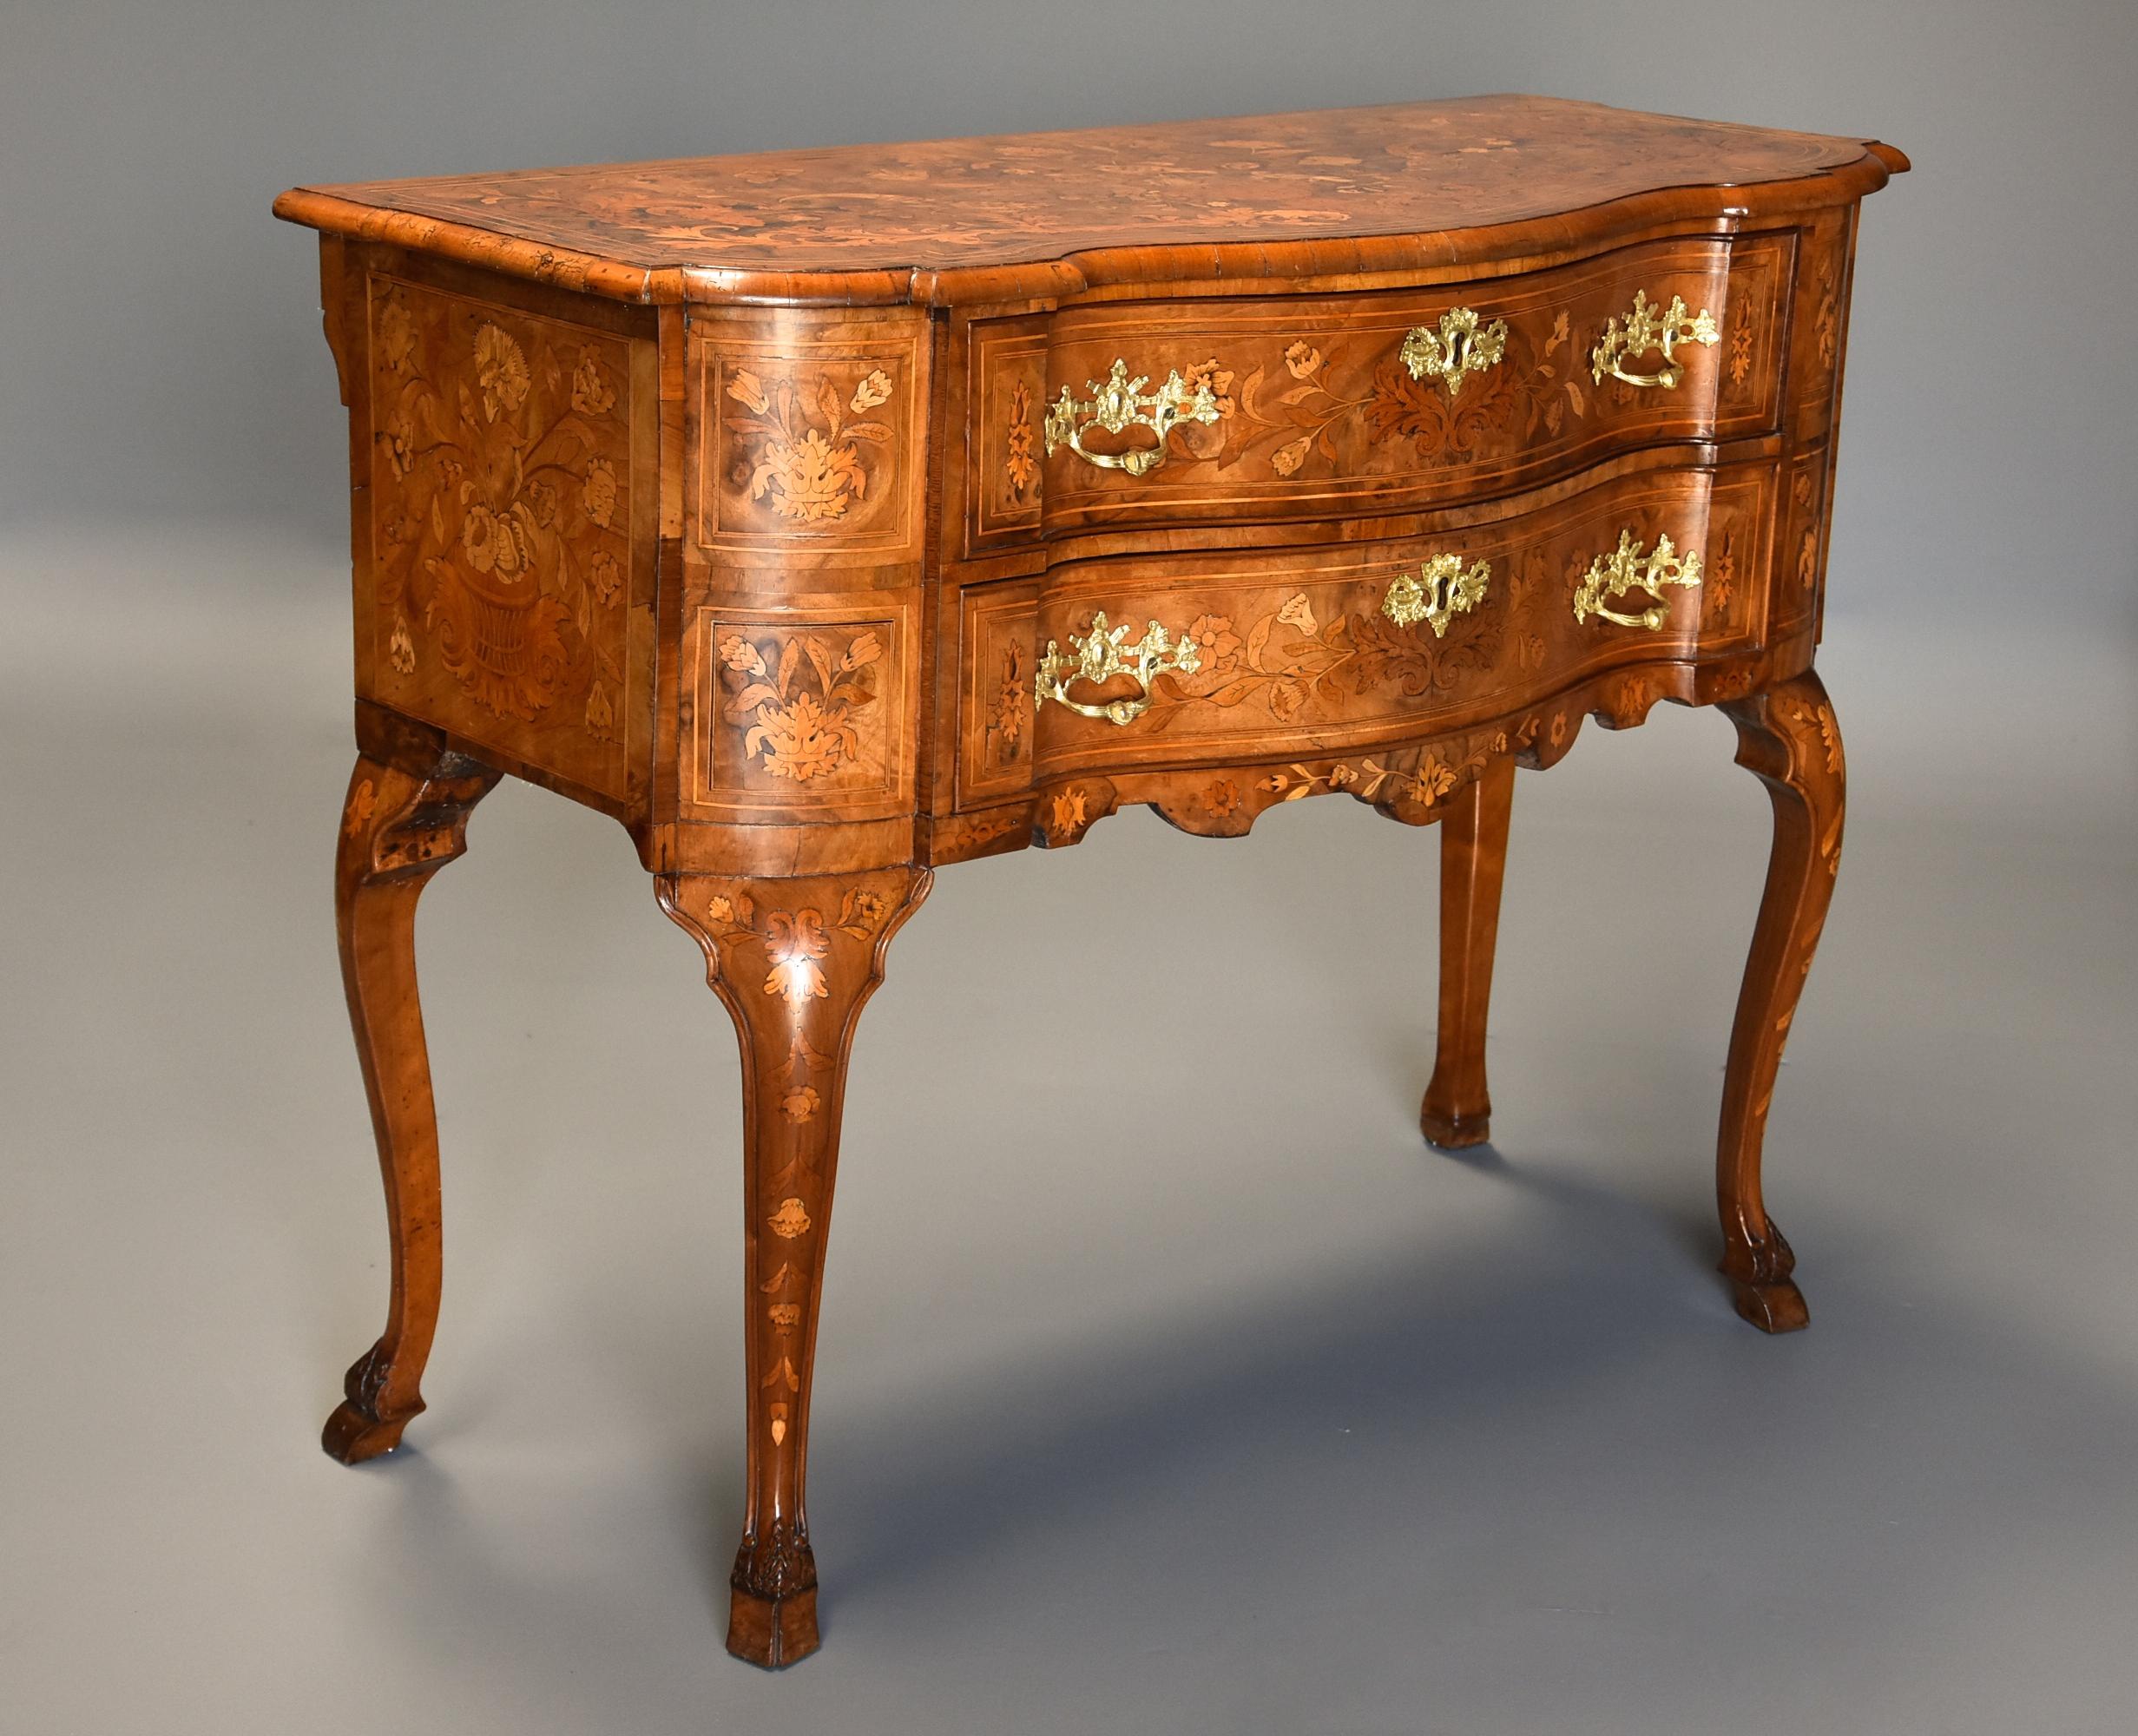 Fine Quality Mid-19th Century Floral Marquetry Walnut Lowboy of Serpentine Form For Sale 1